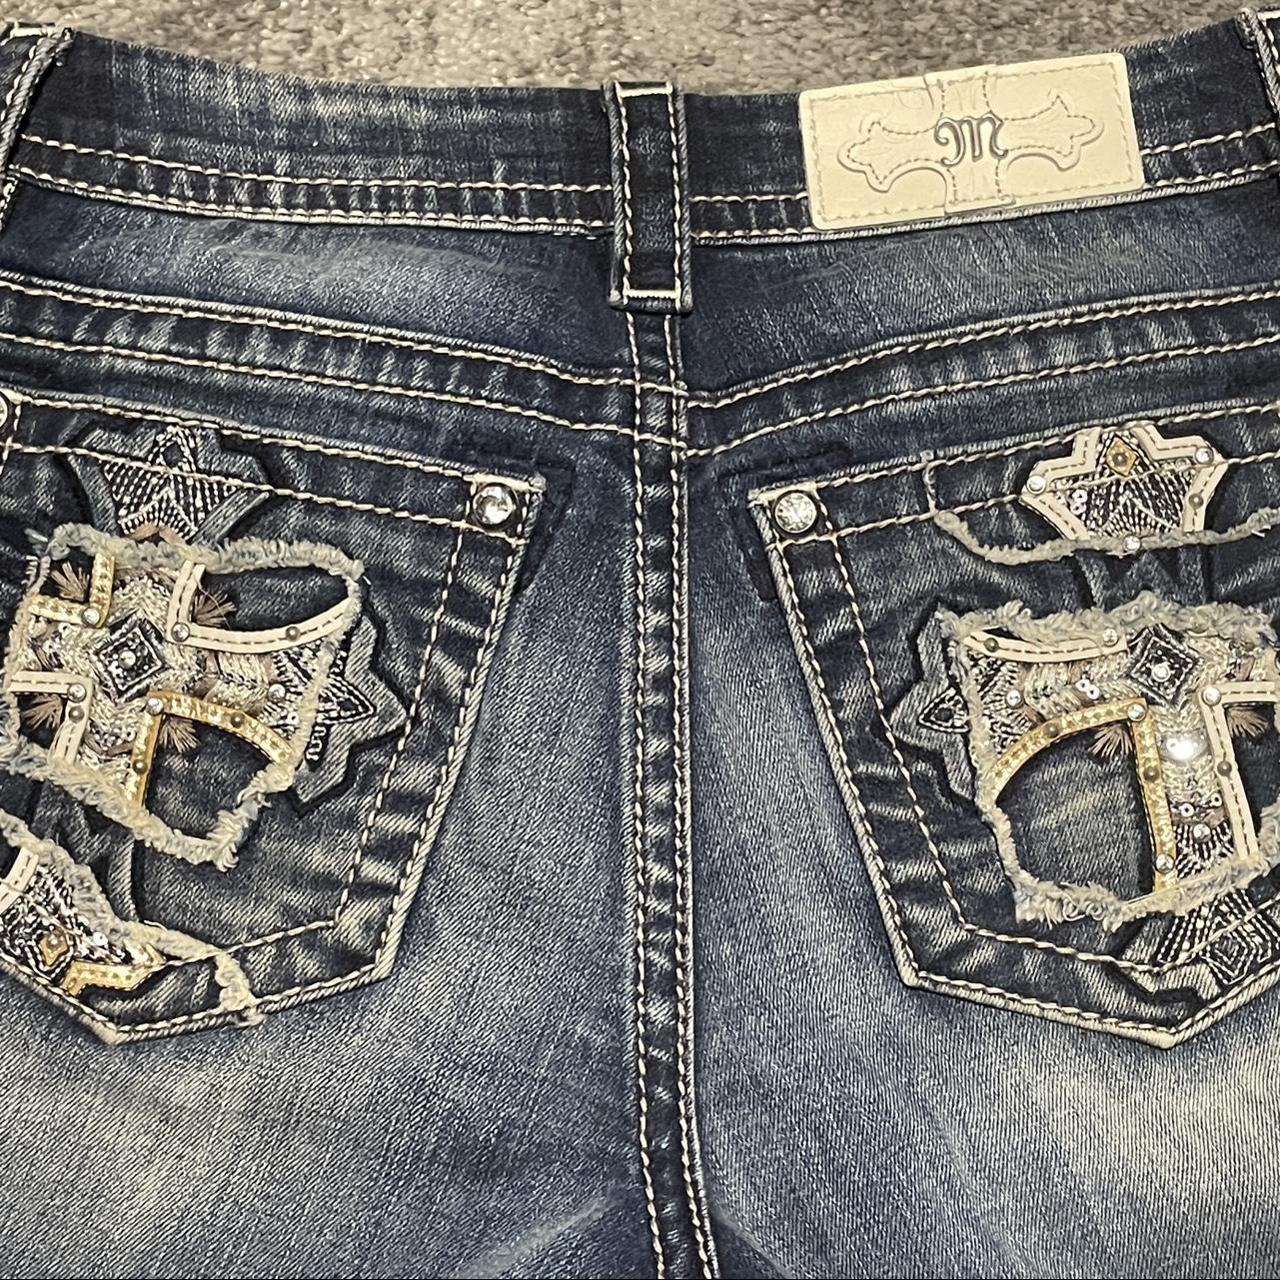 SHEIN Women's Distressed Blue Jeans Size Small Grunge Y2k Aesthetic